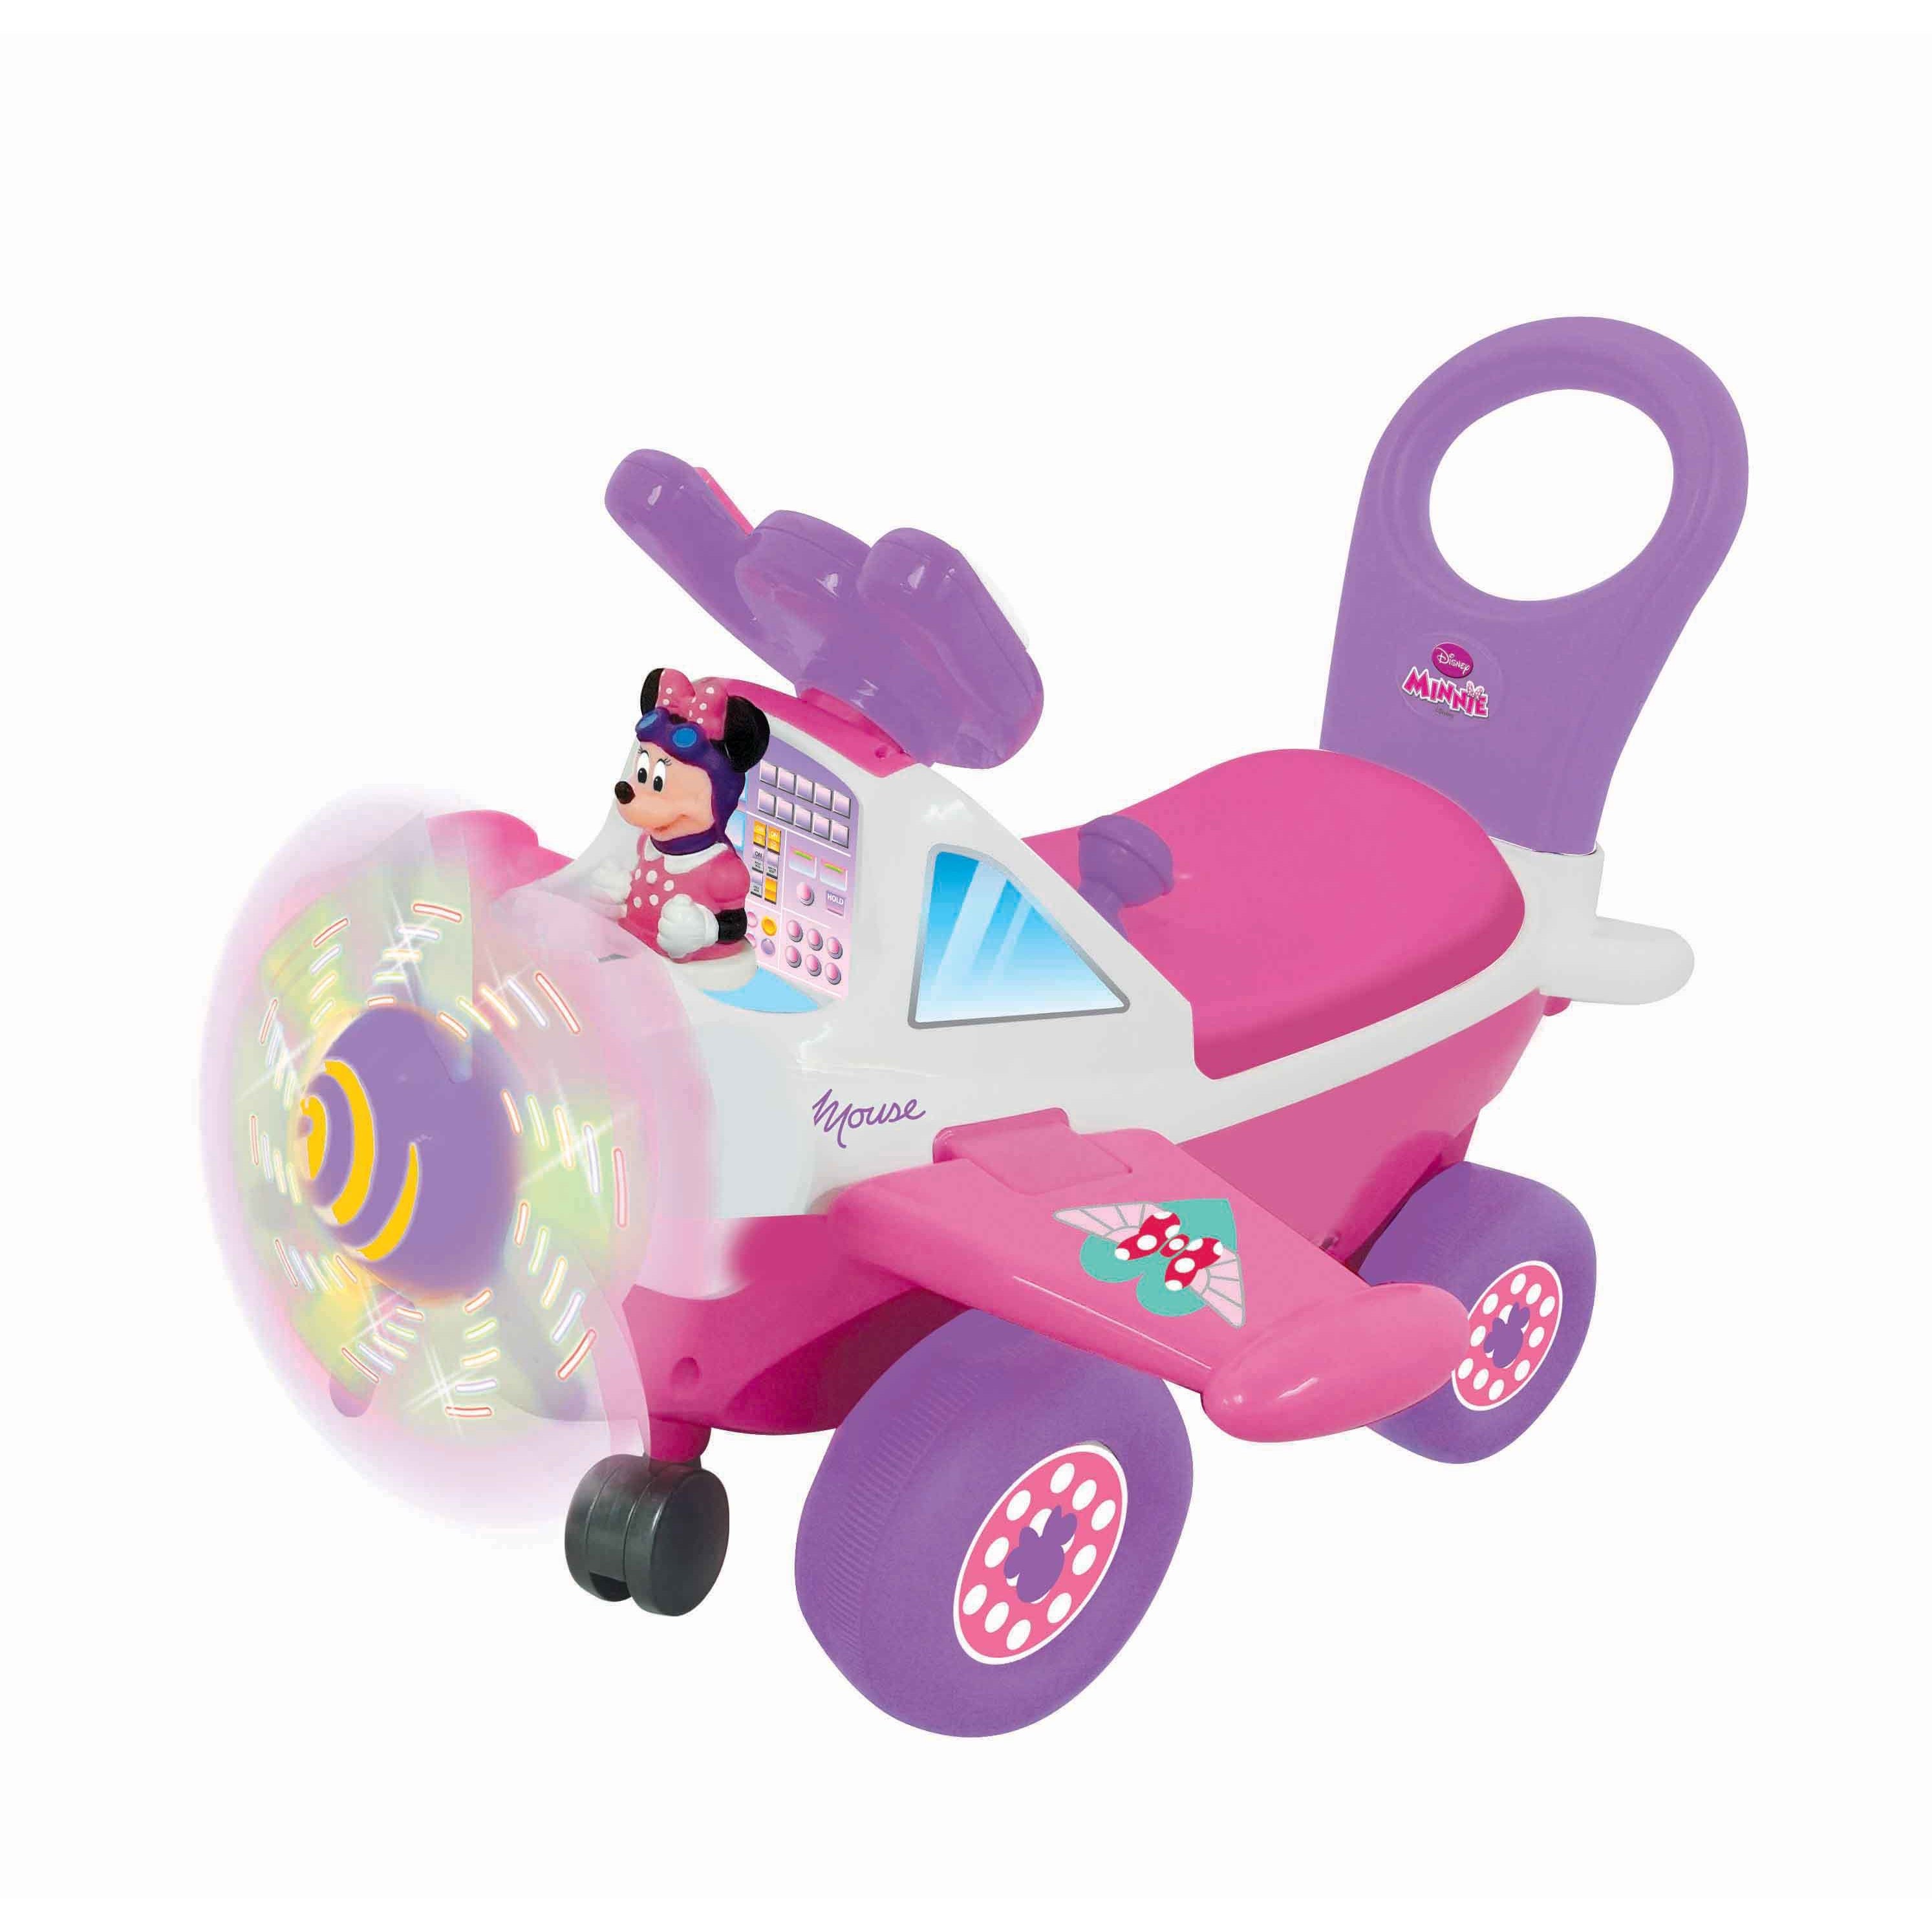 minnie mouse airplane toy